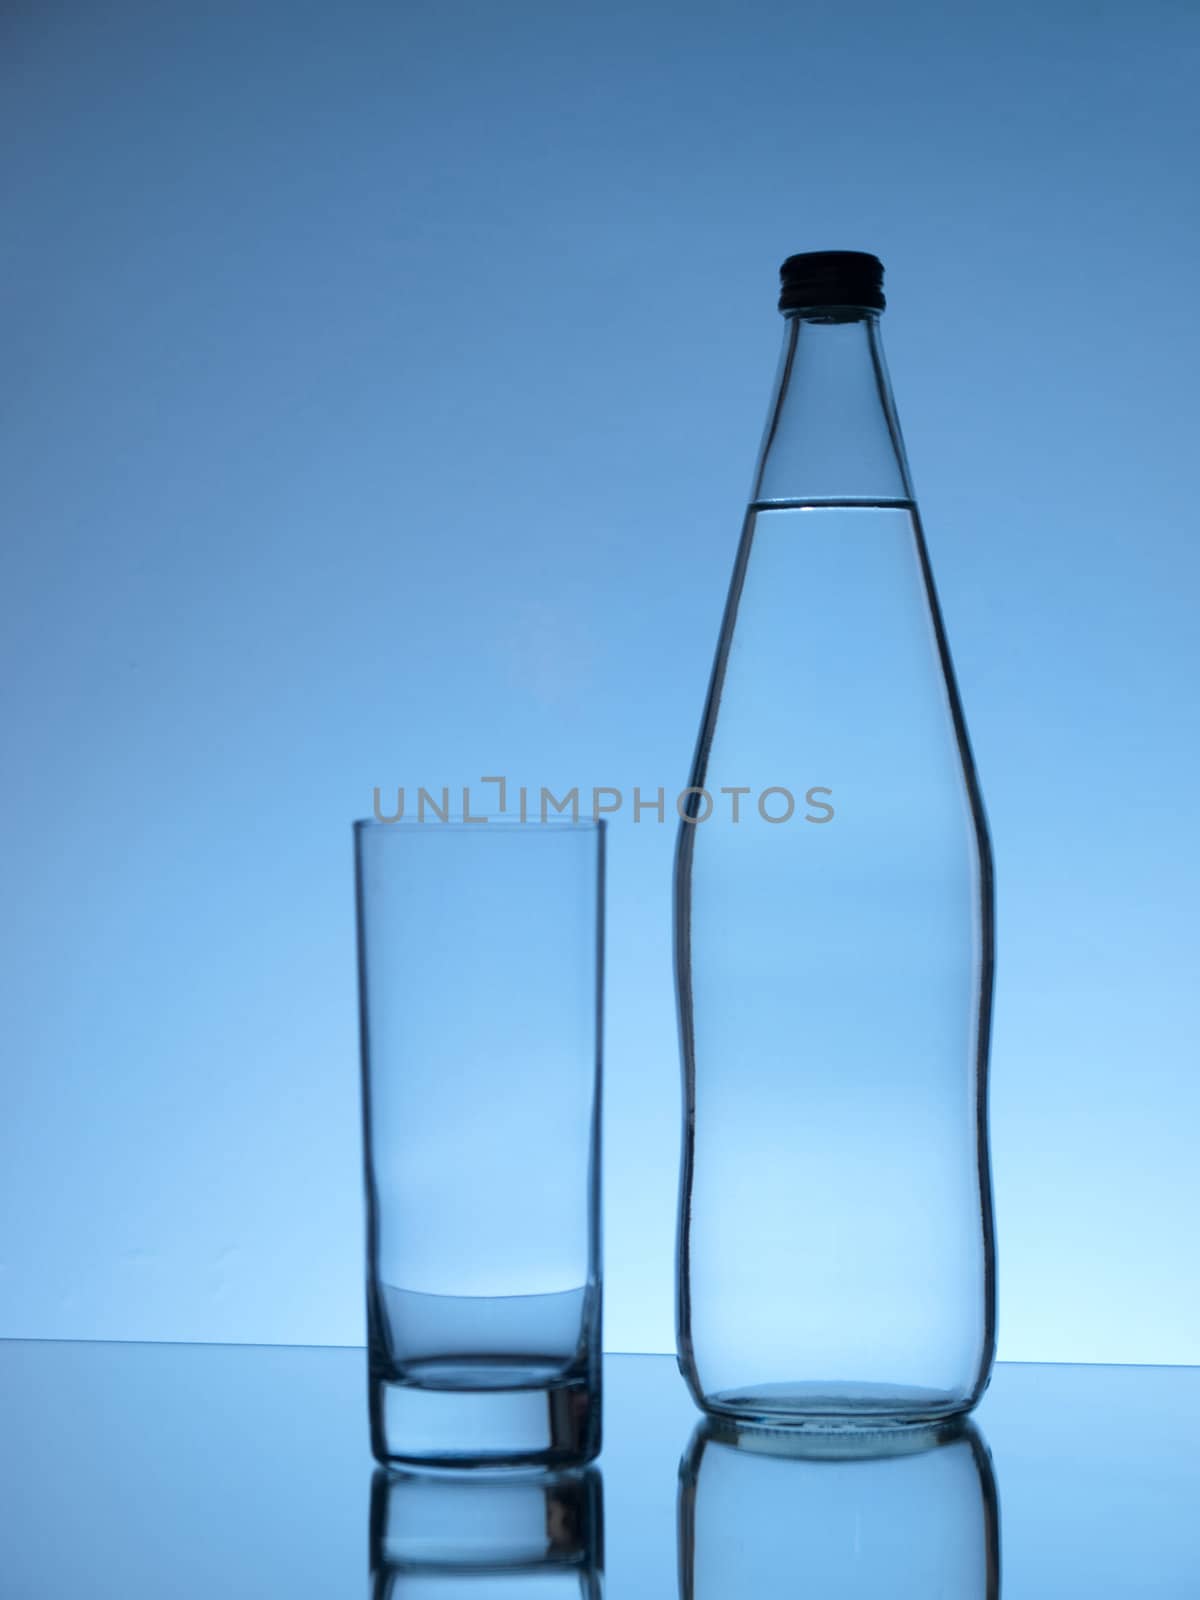 Bottle and glass by Alex_L